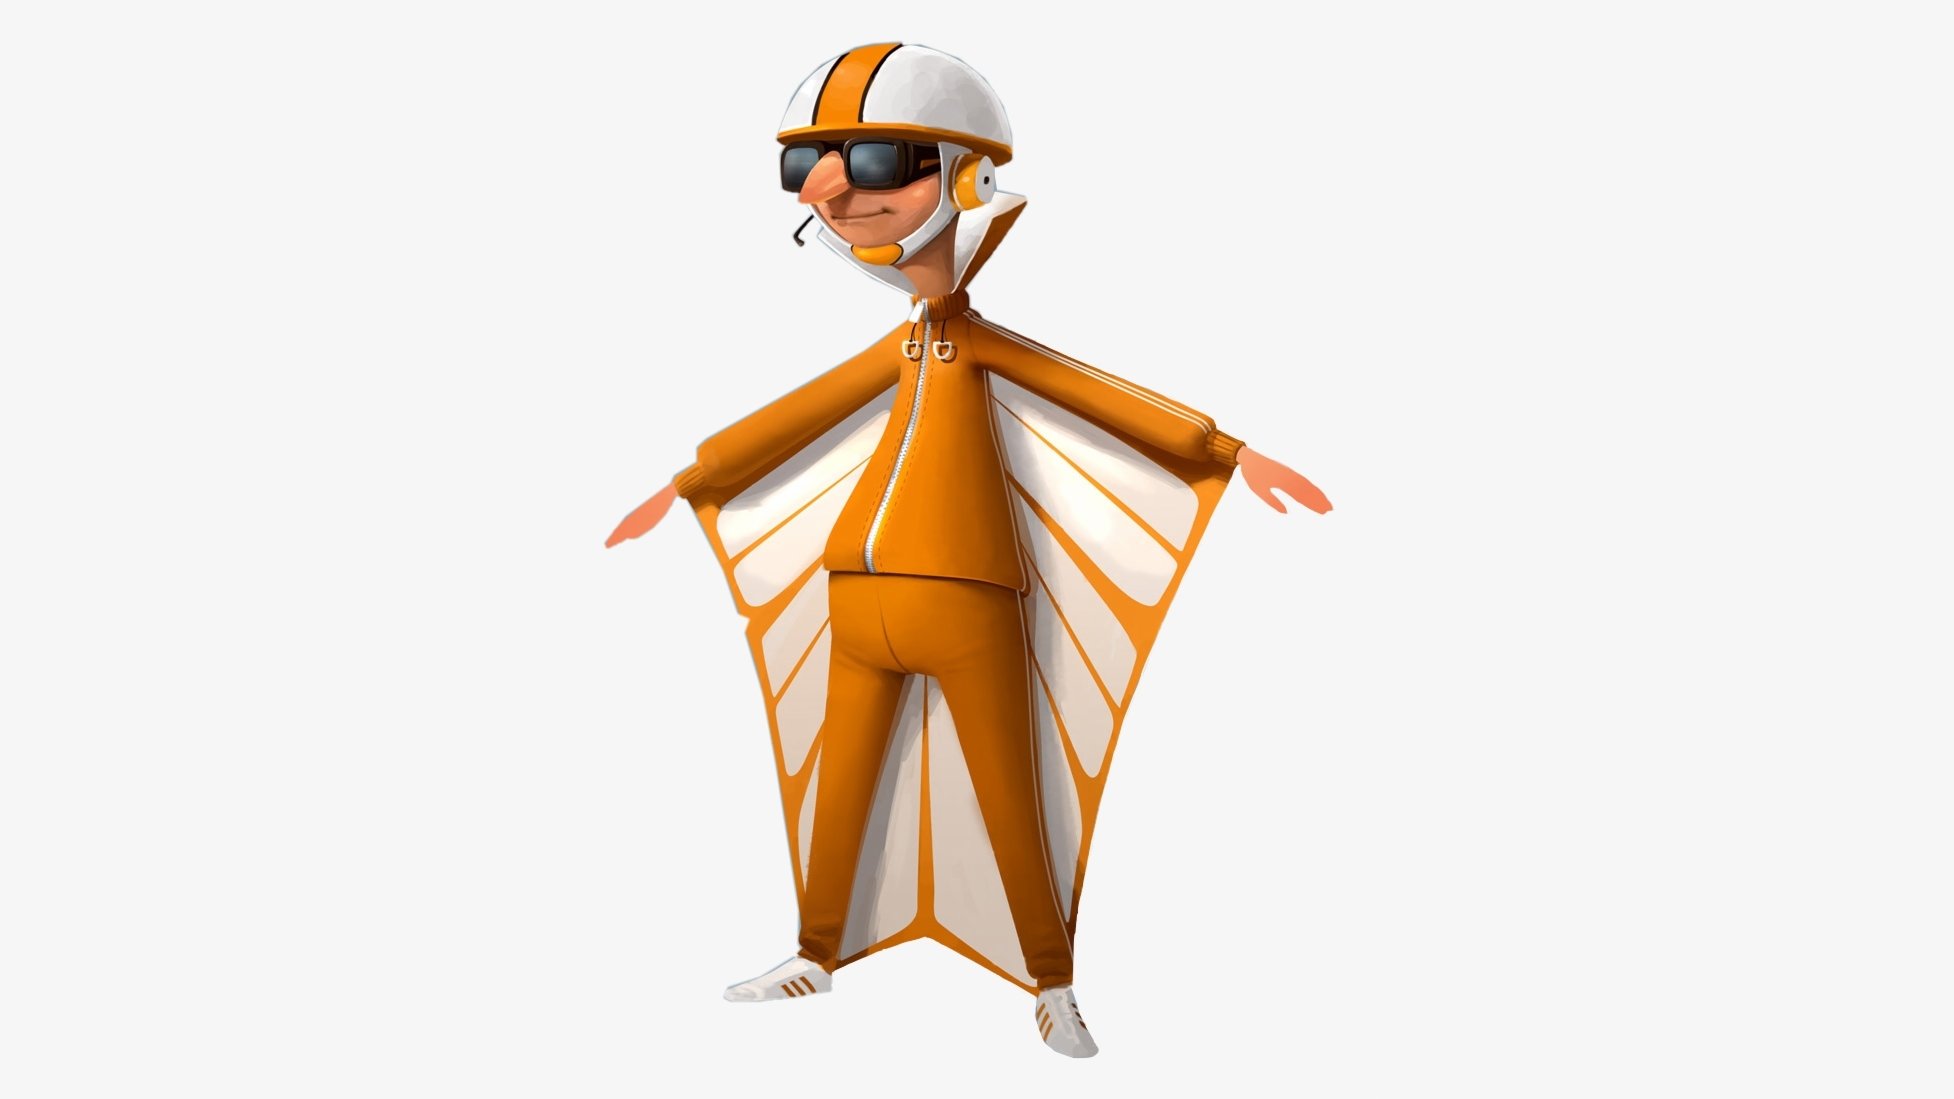 An image of Vector from Despicable Me